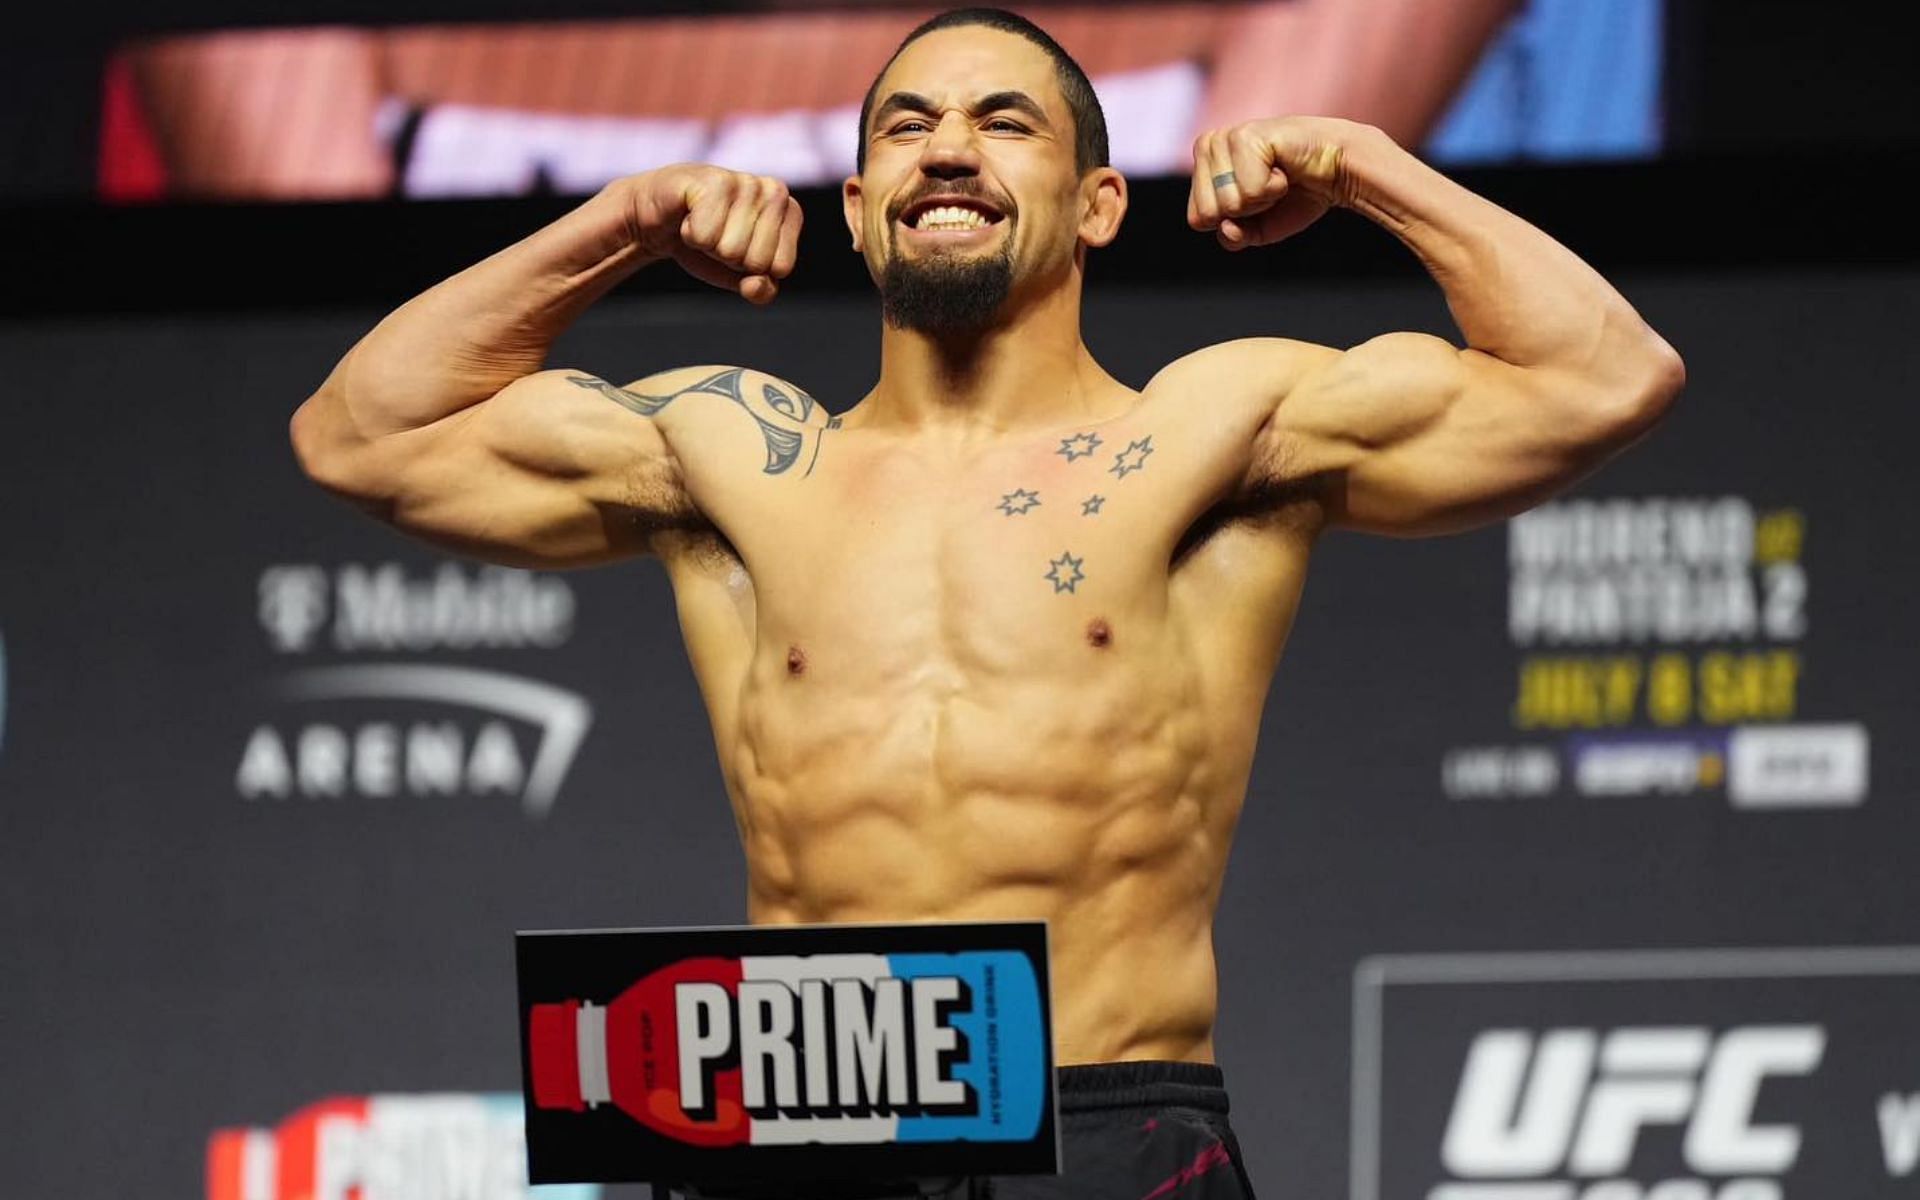 What changes would Robert Whittaker make to MMA? [Image Credit: @robwhittakermma on Instagram]